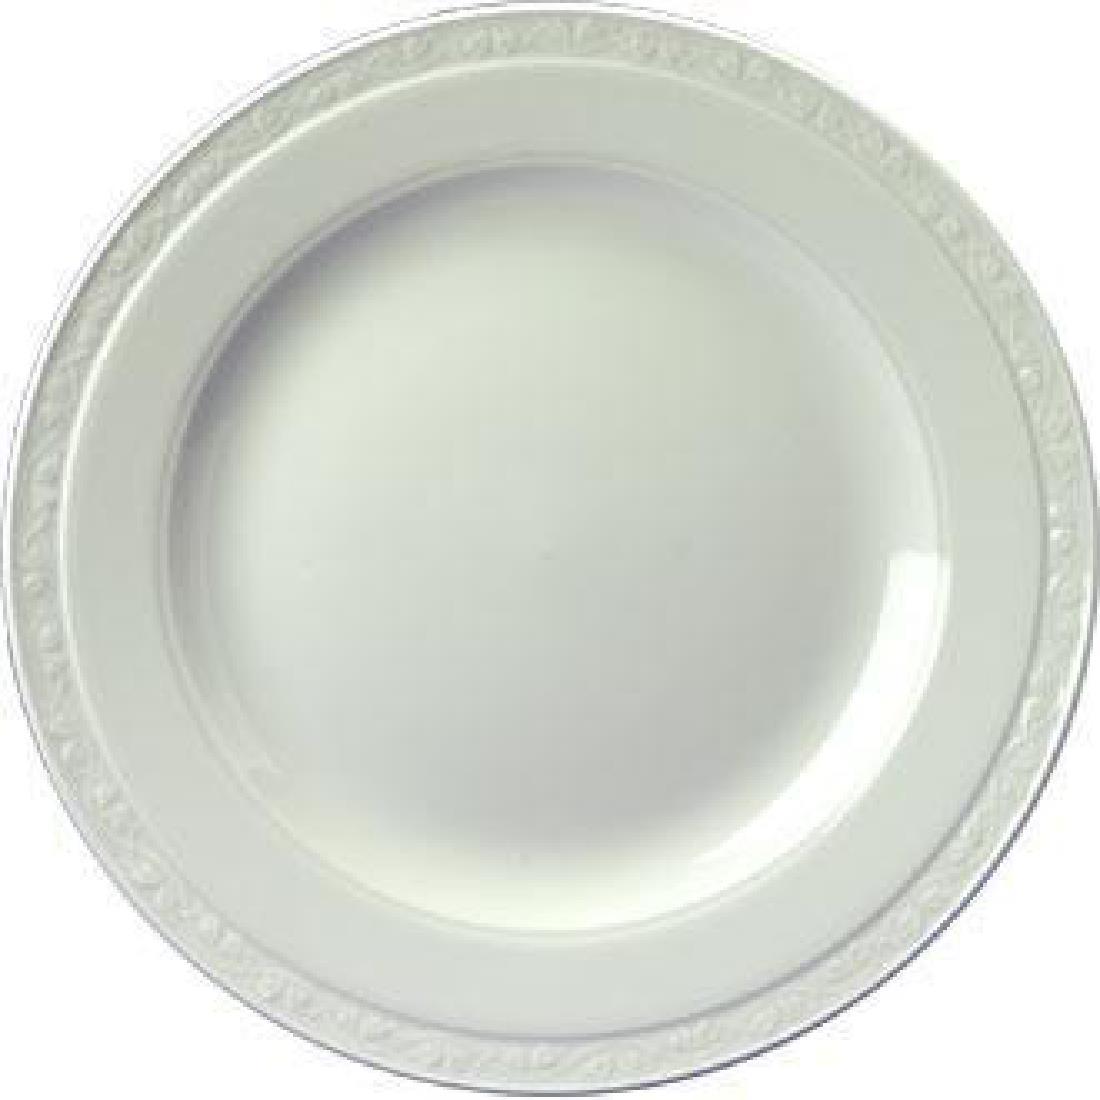 Churchill Chateau Blanc Plates 202mm (Pack of 24) - M547  - 1